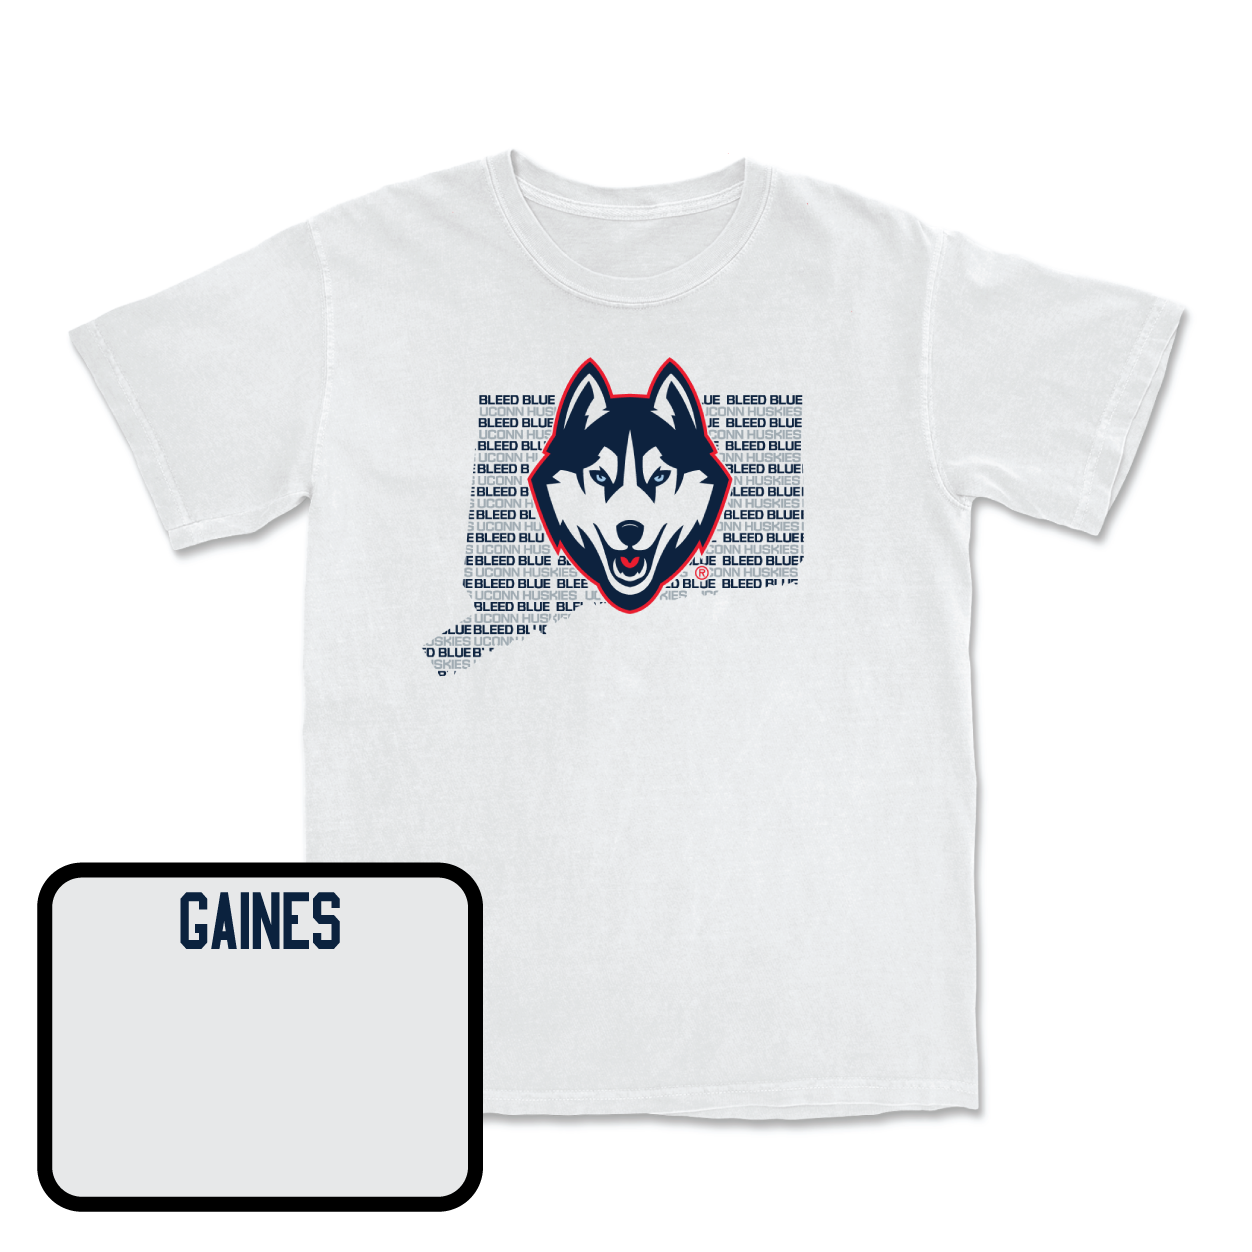 White Men's Track & Field Bleed Blue Comfort Colors Tee X-Large / Carl Gaines | #